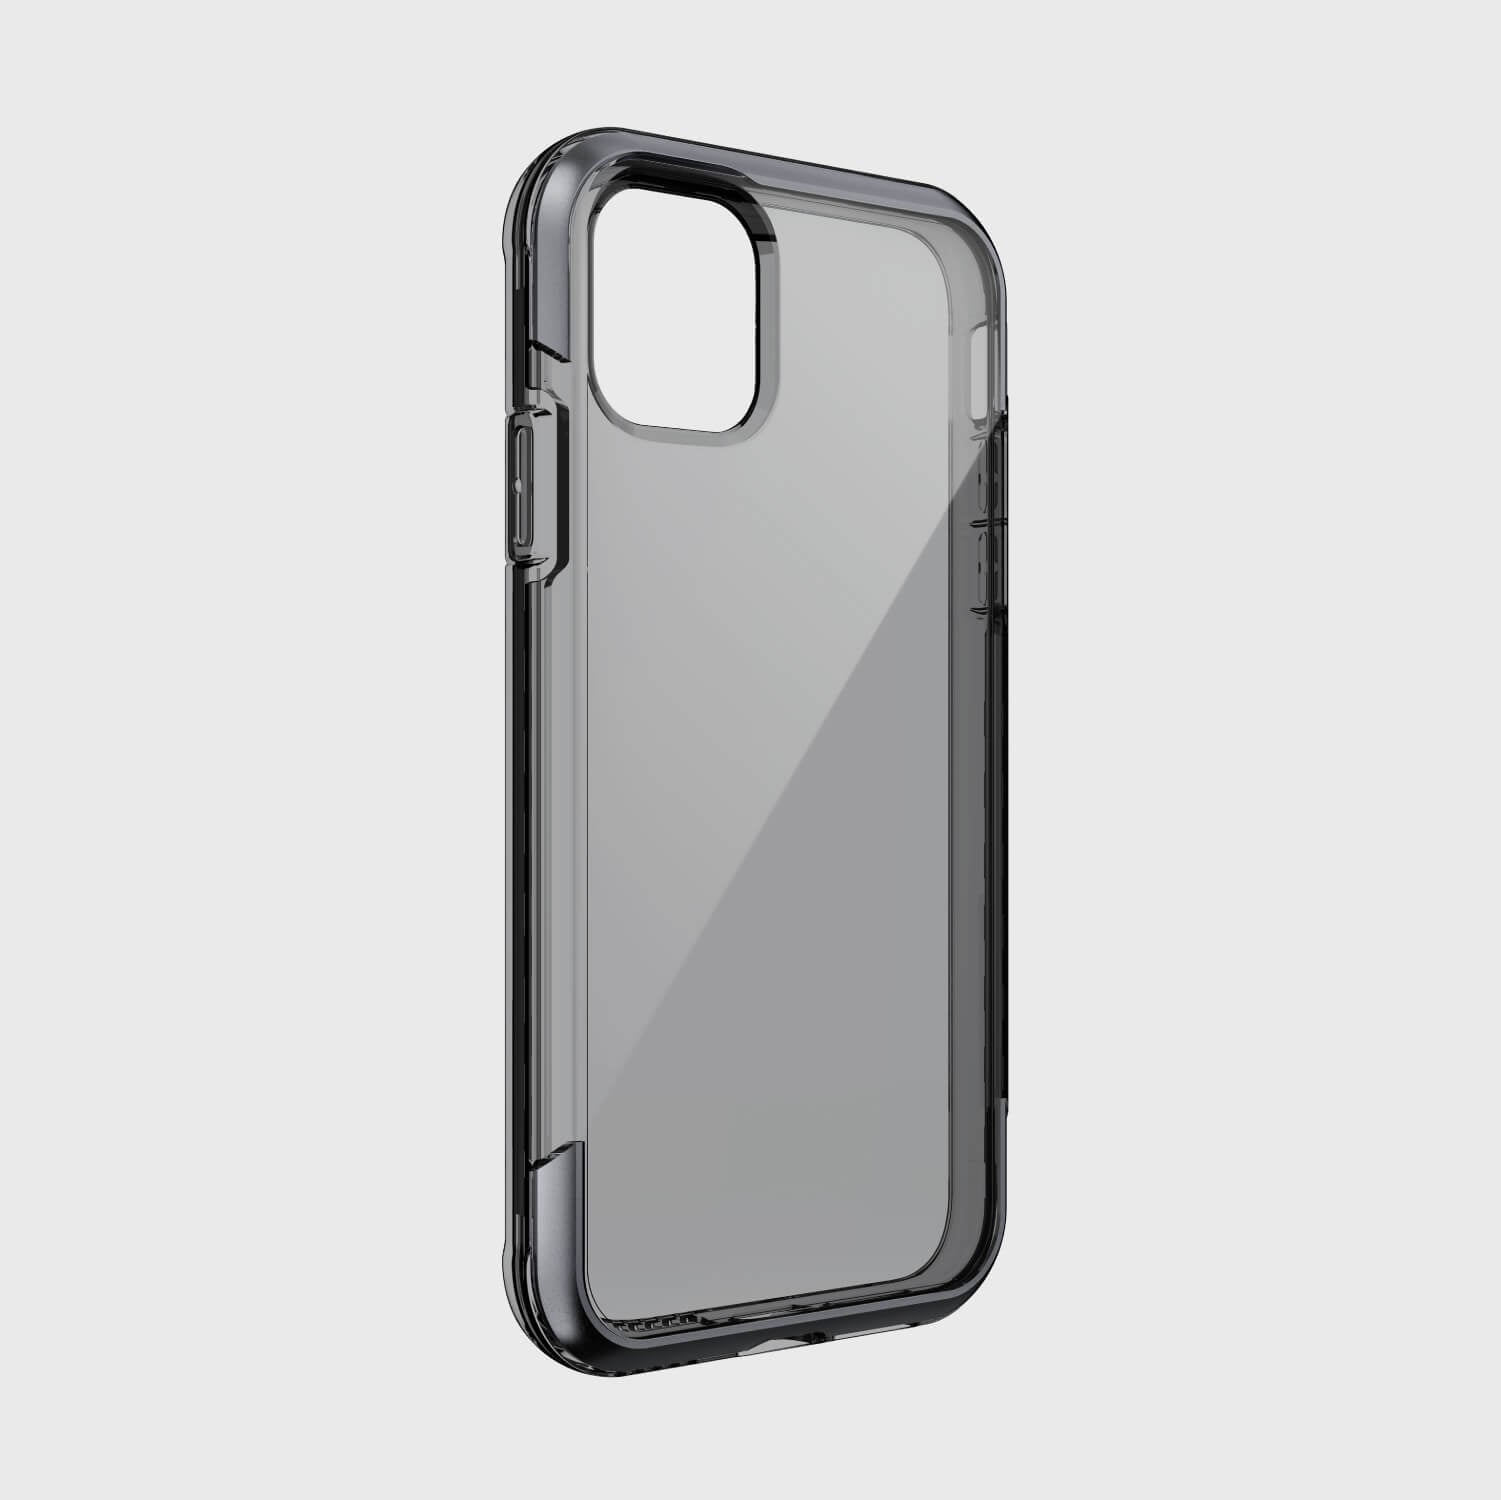 The back view of the iPhone 11 Pro case featuring wireless charging. becomes The back view of the iPhone 11 Case - AIR by Raptic featuring wireless charging.